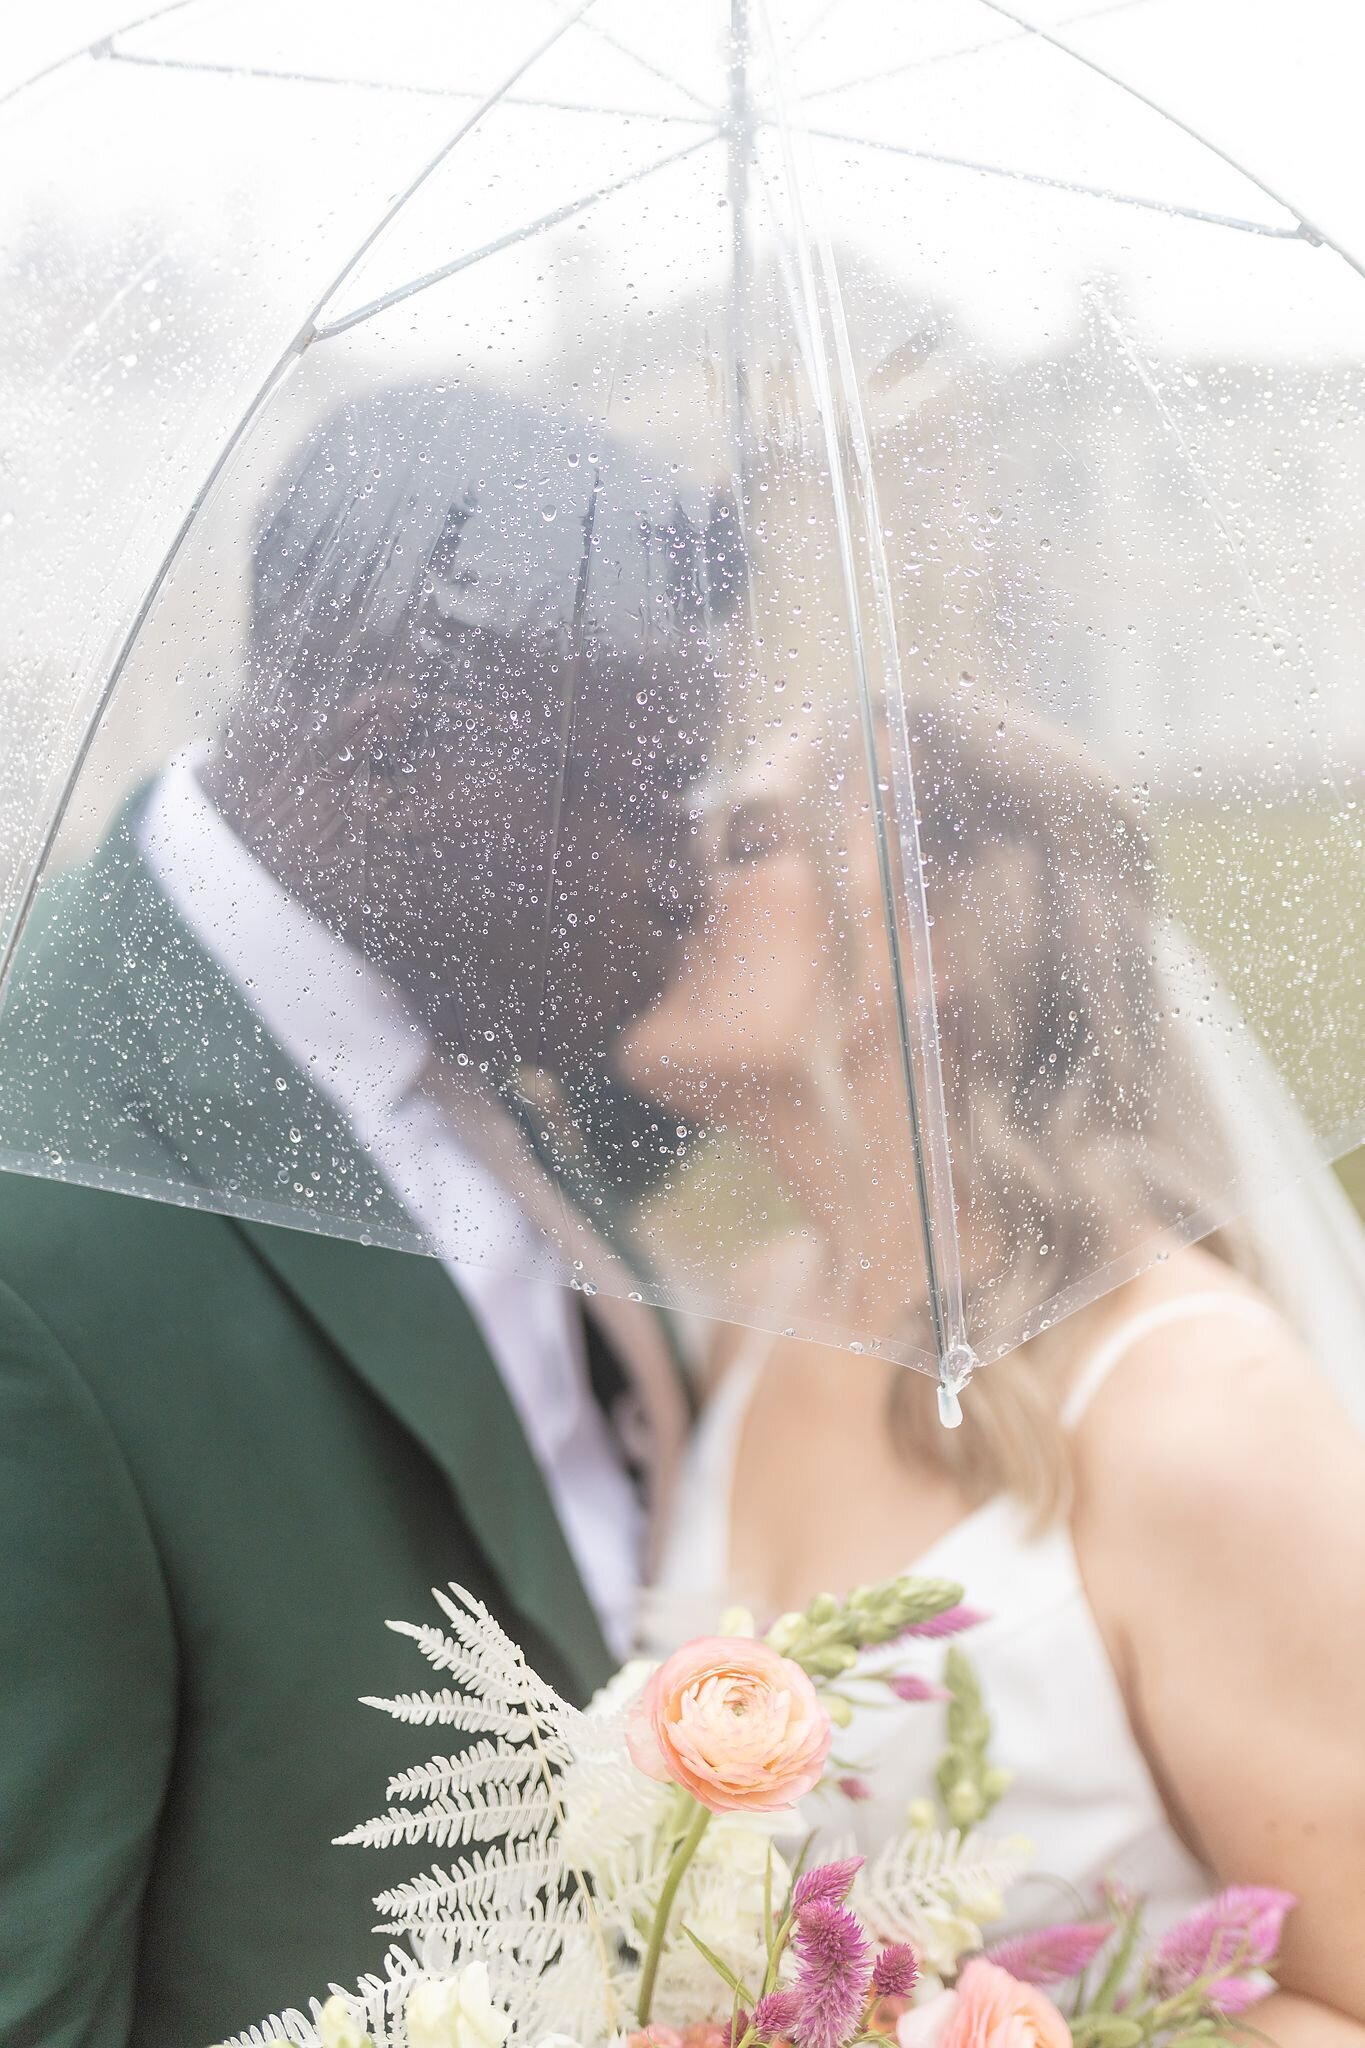 Bride-and-groom-kiss-under-an-umbrella-on-their-wedding-day-at-dundurn-castle-in-hamilton-ontario